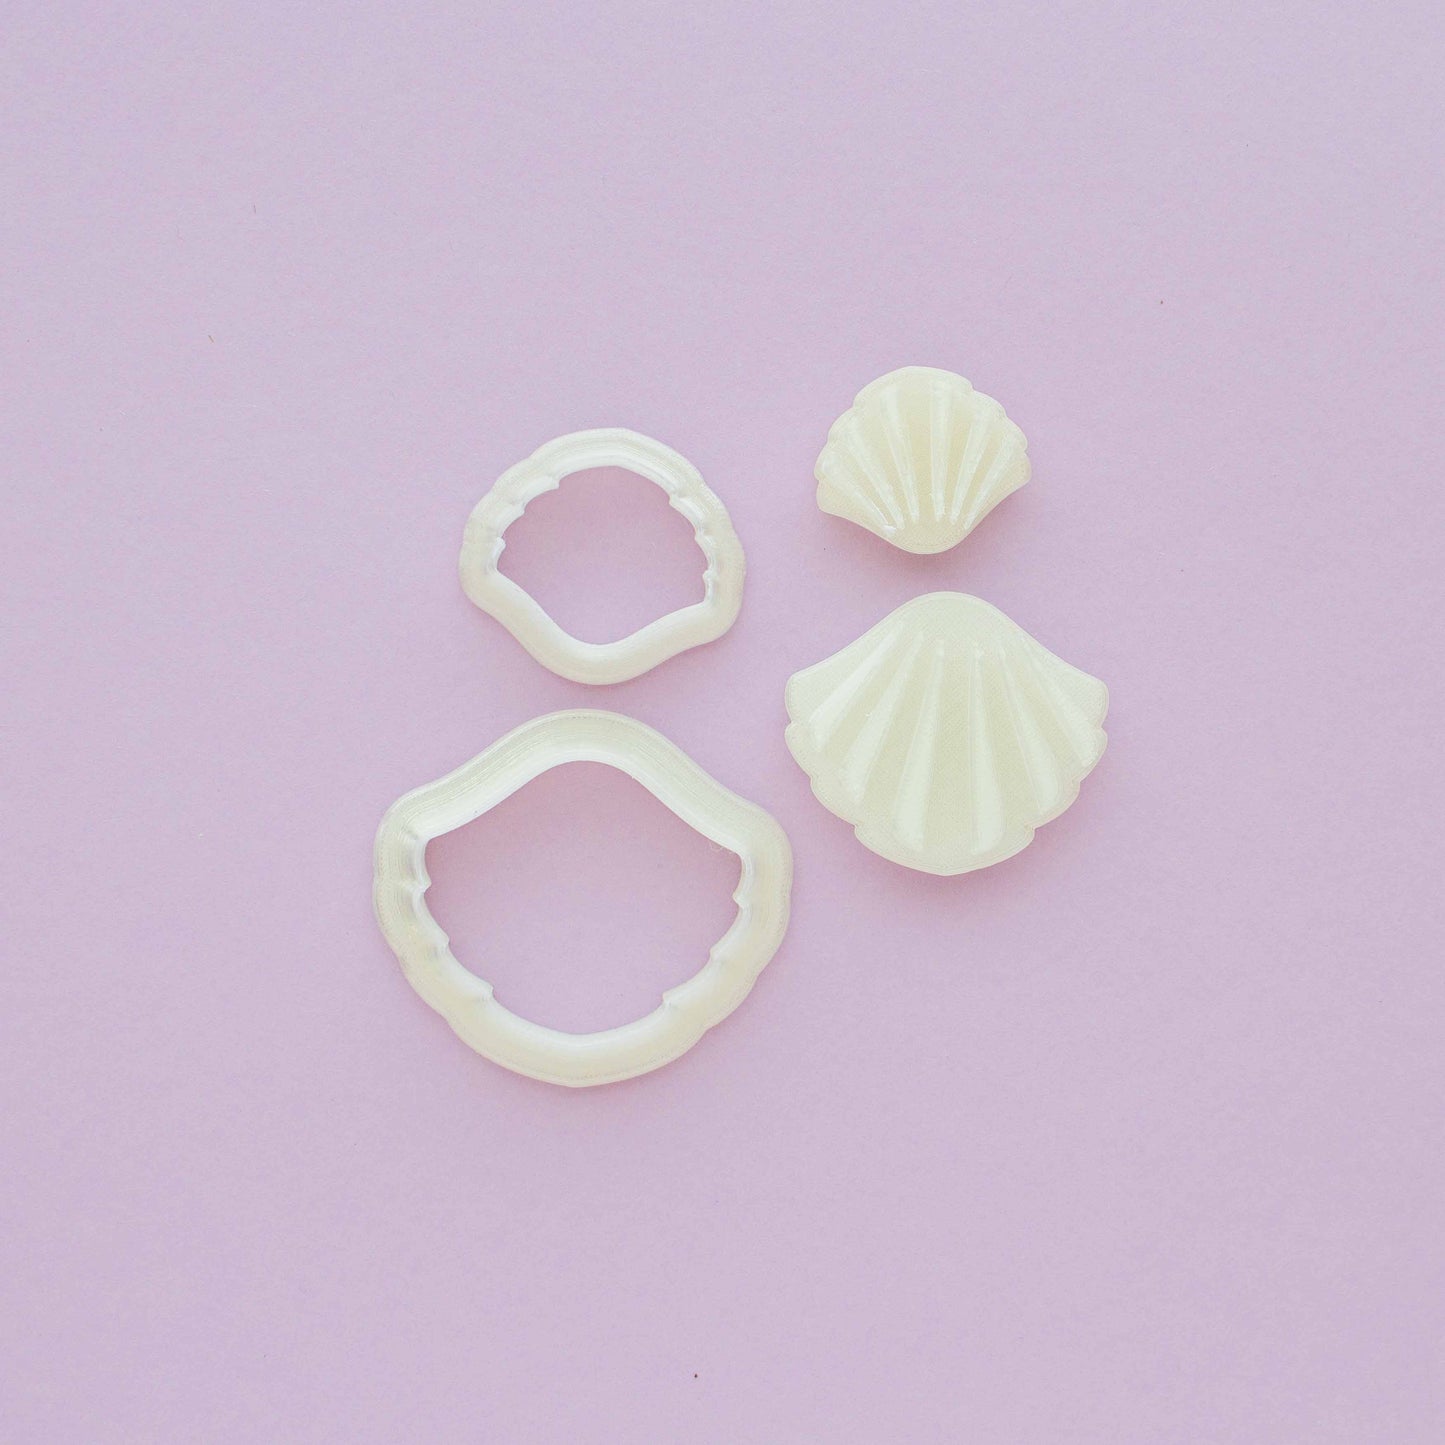 Shell shaped polymer clay cutters and stamps